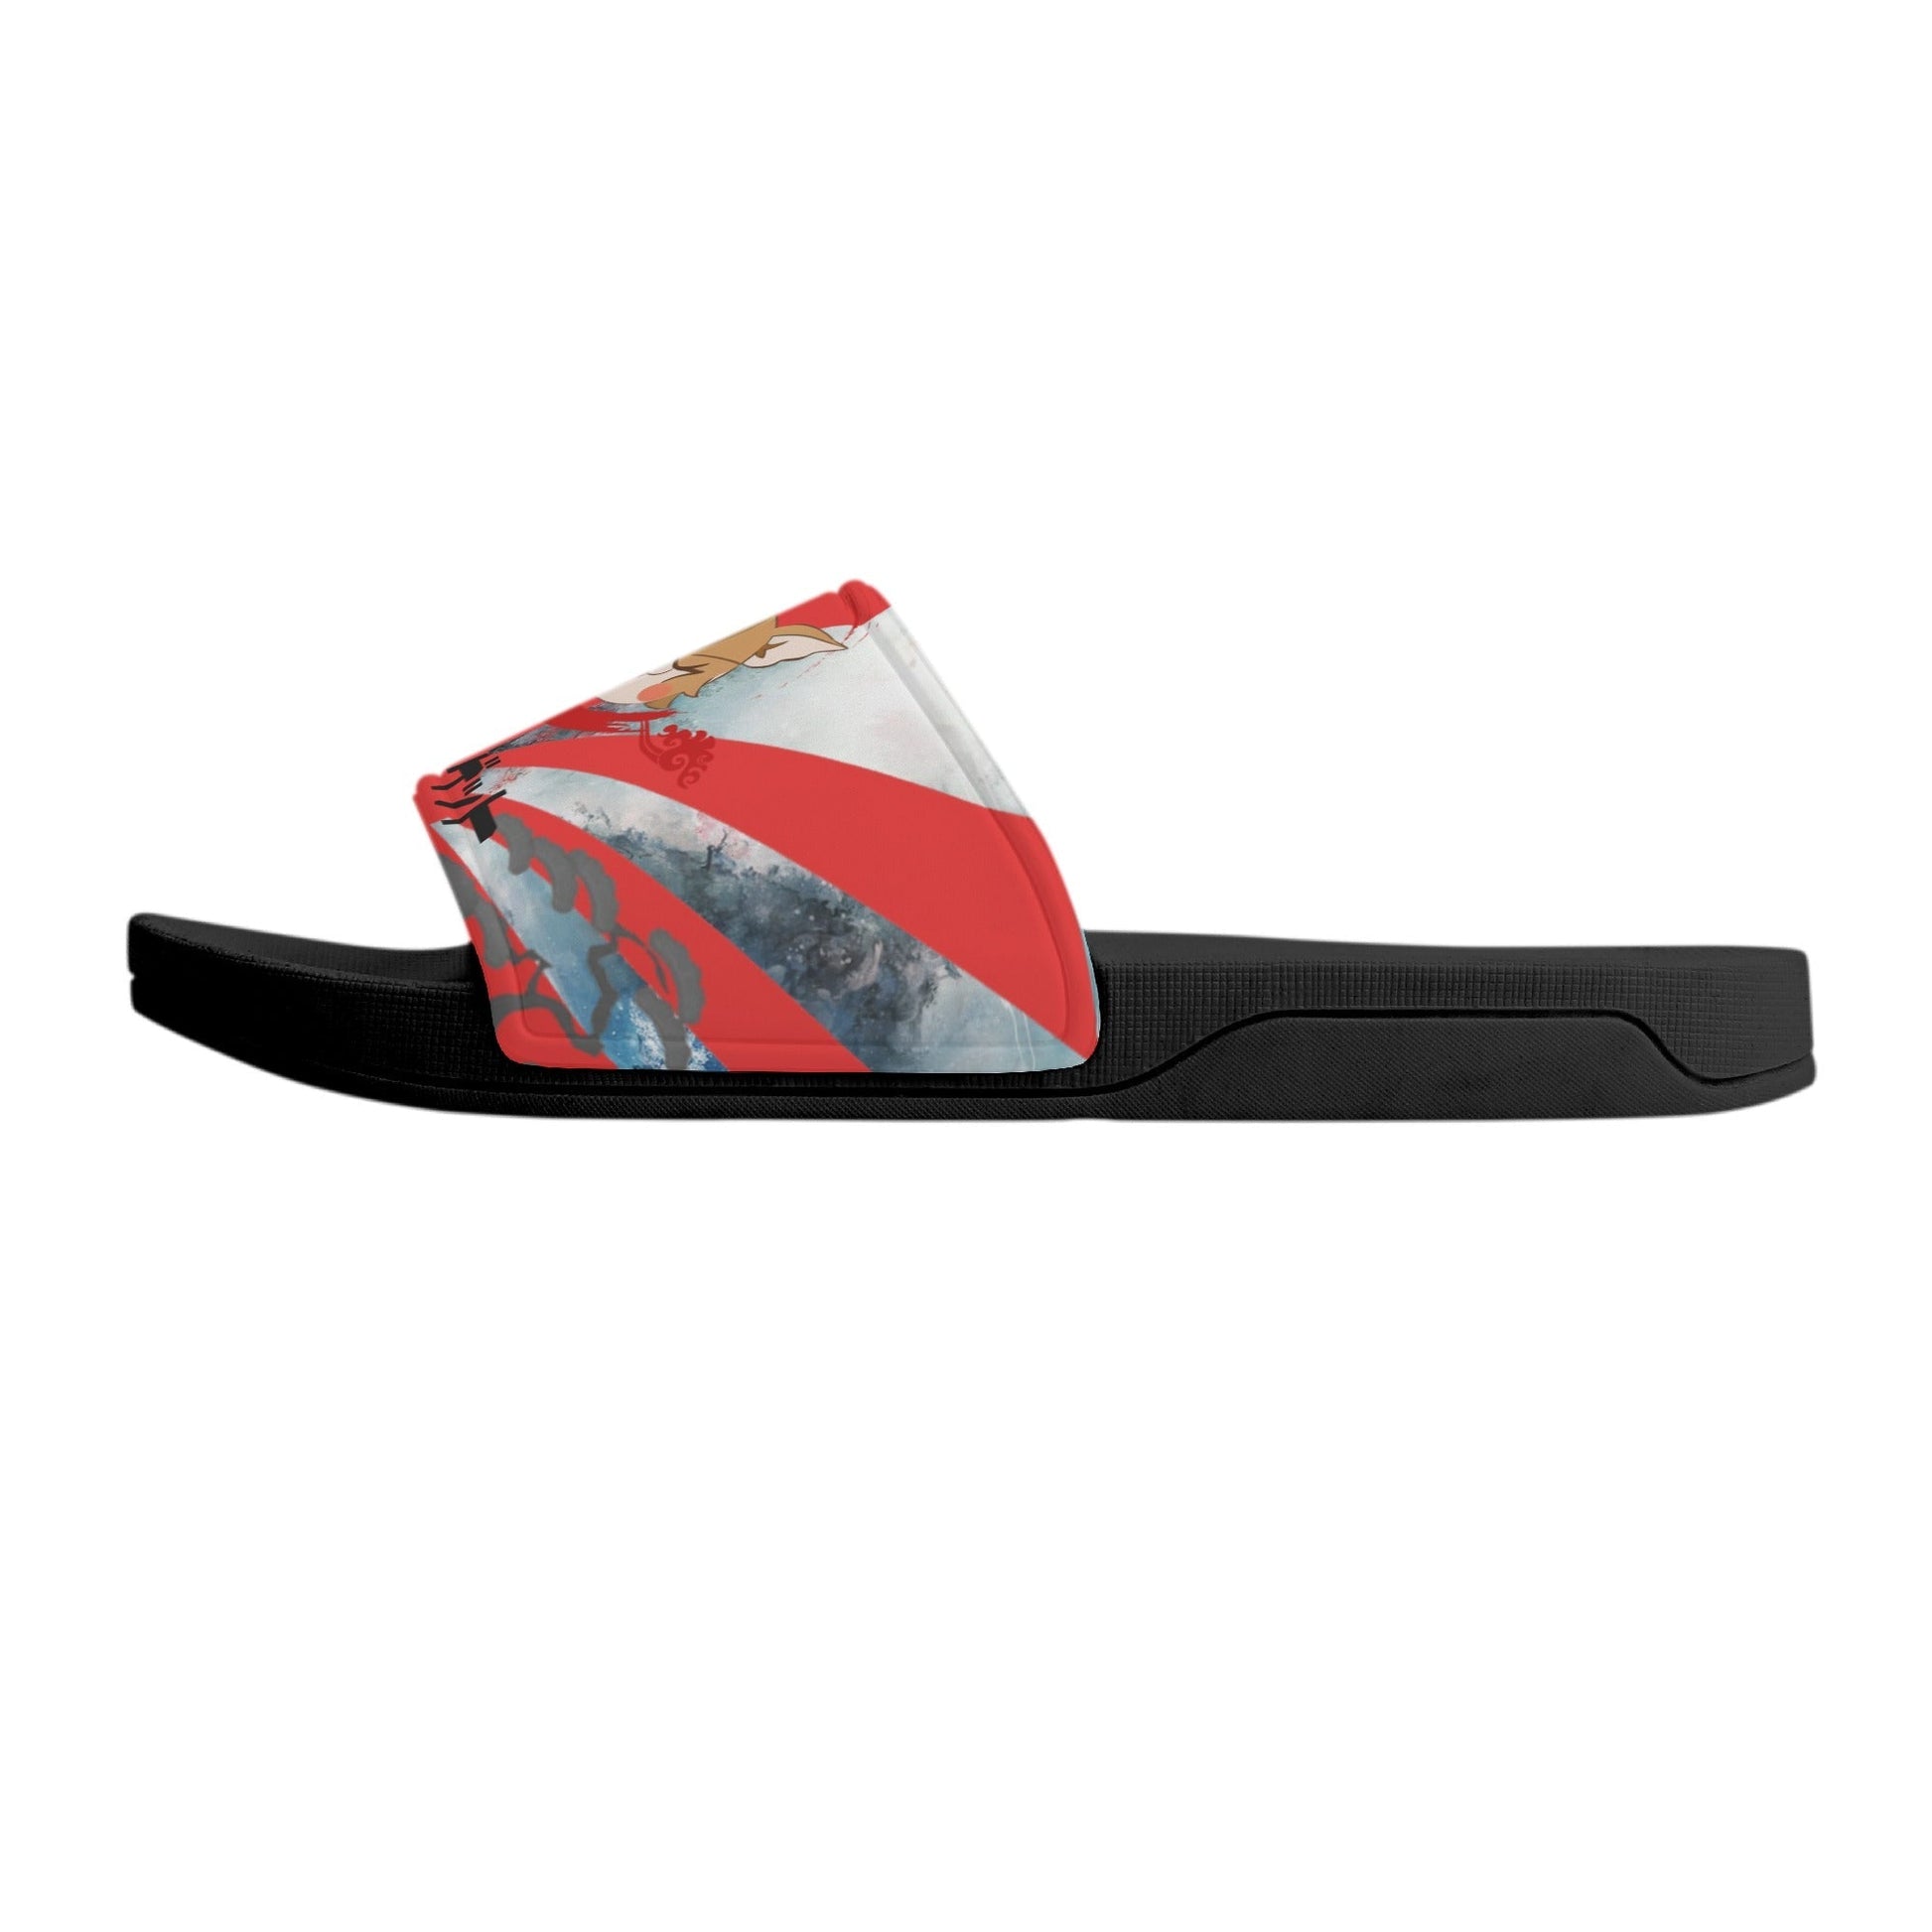 Stand out  with the  Tokyo Nugget Womens Slide Sandals Shoes  available at Hey Nugget. Grab yours today!